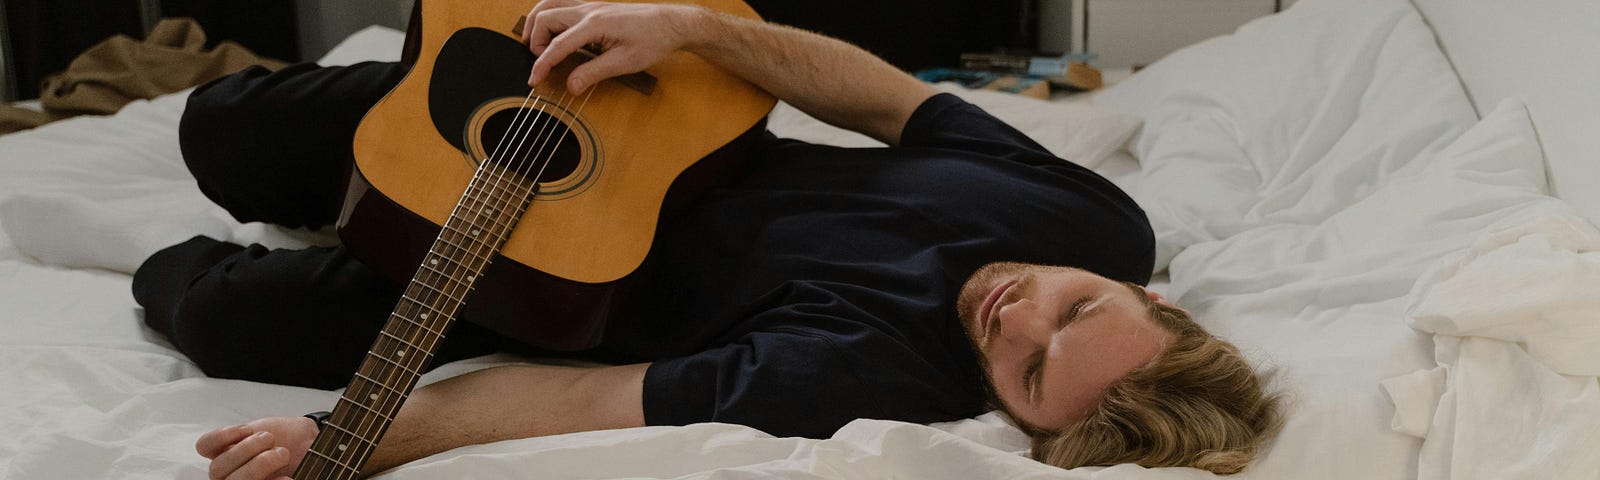 Image shows man with blond hair and dark clothing lying despondently on a bed with white linens while holding and strumming an acoustic guitar